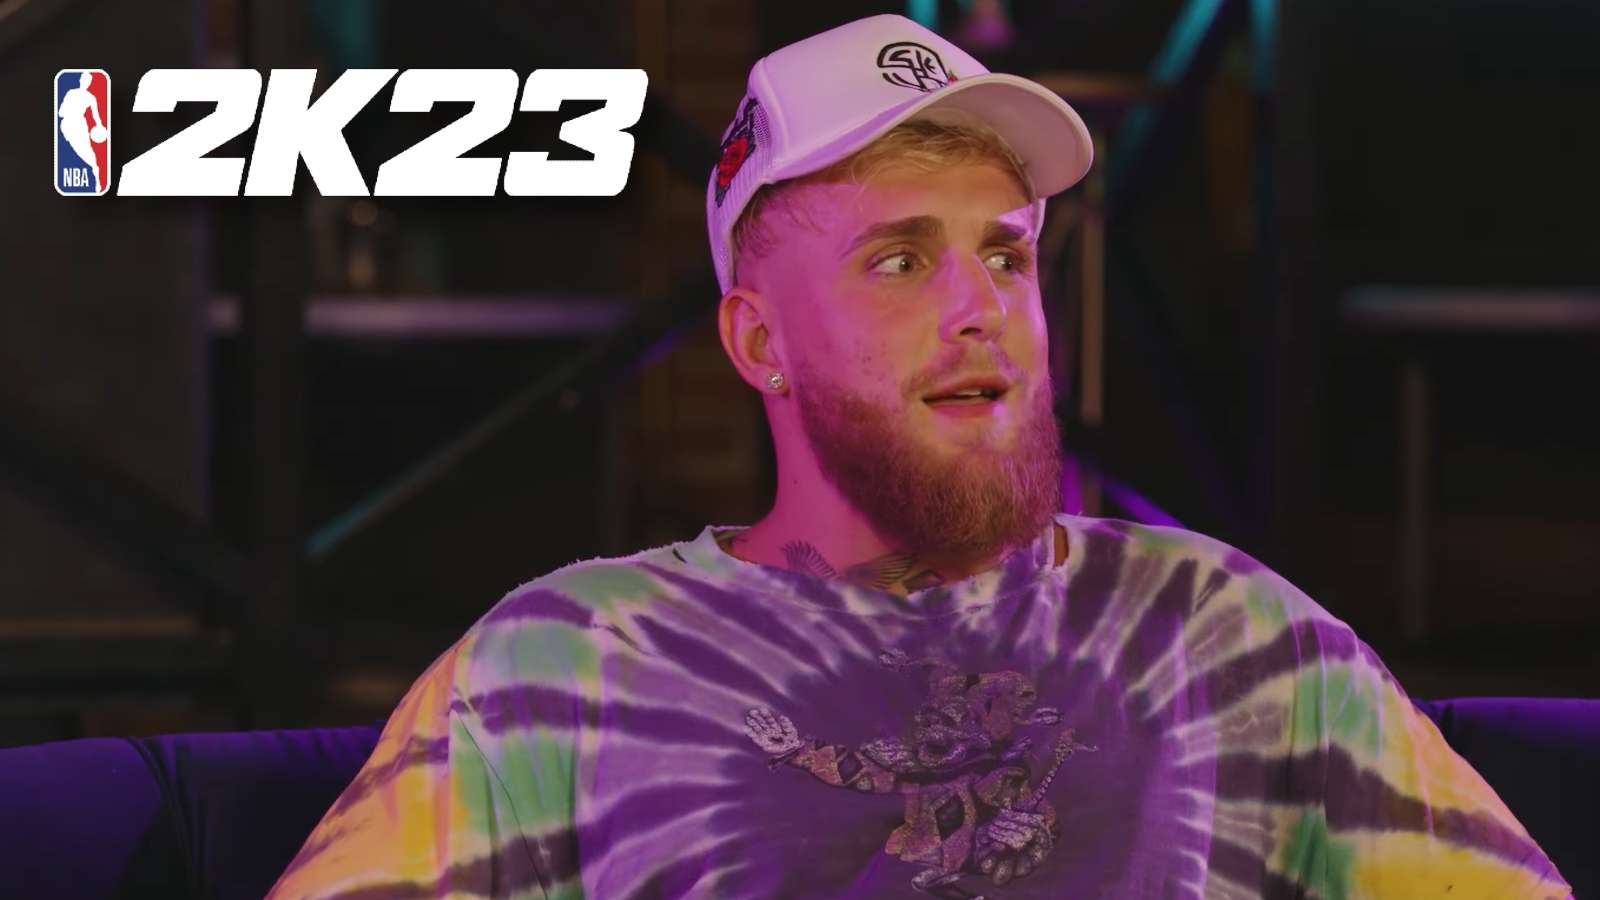 Jake Paul talking to Ronnie2K about joining 2K23